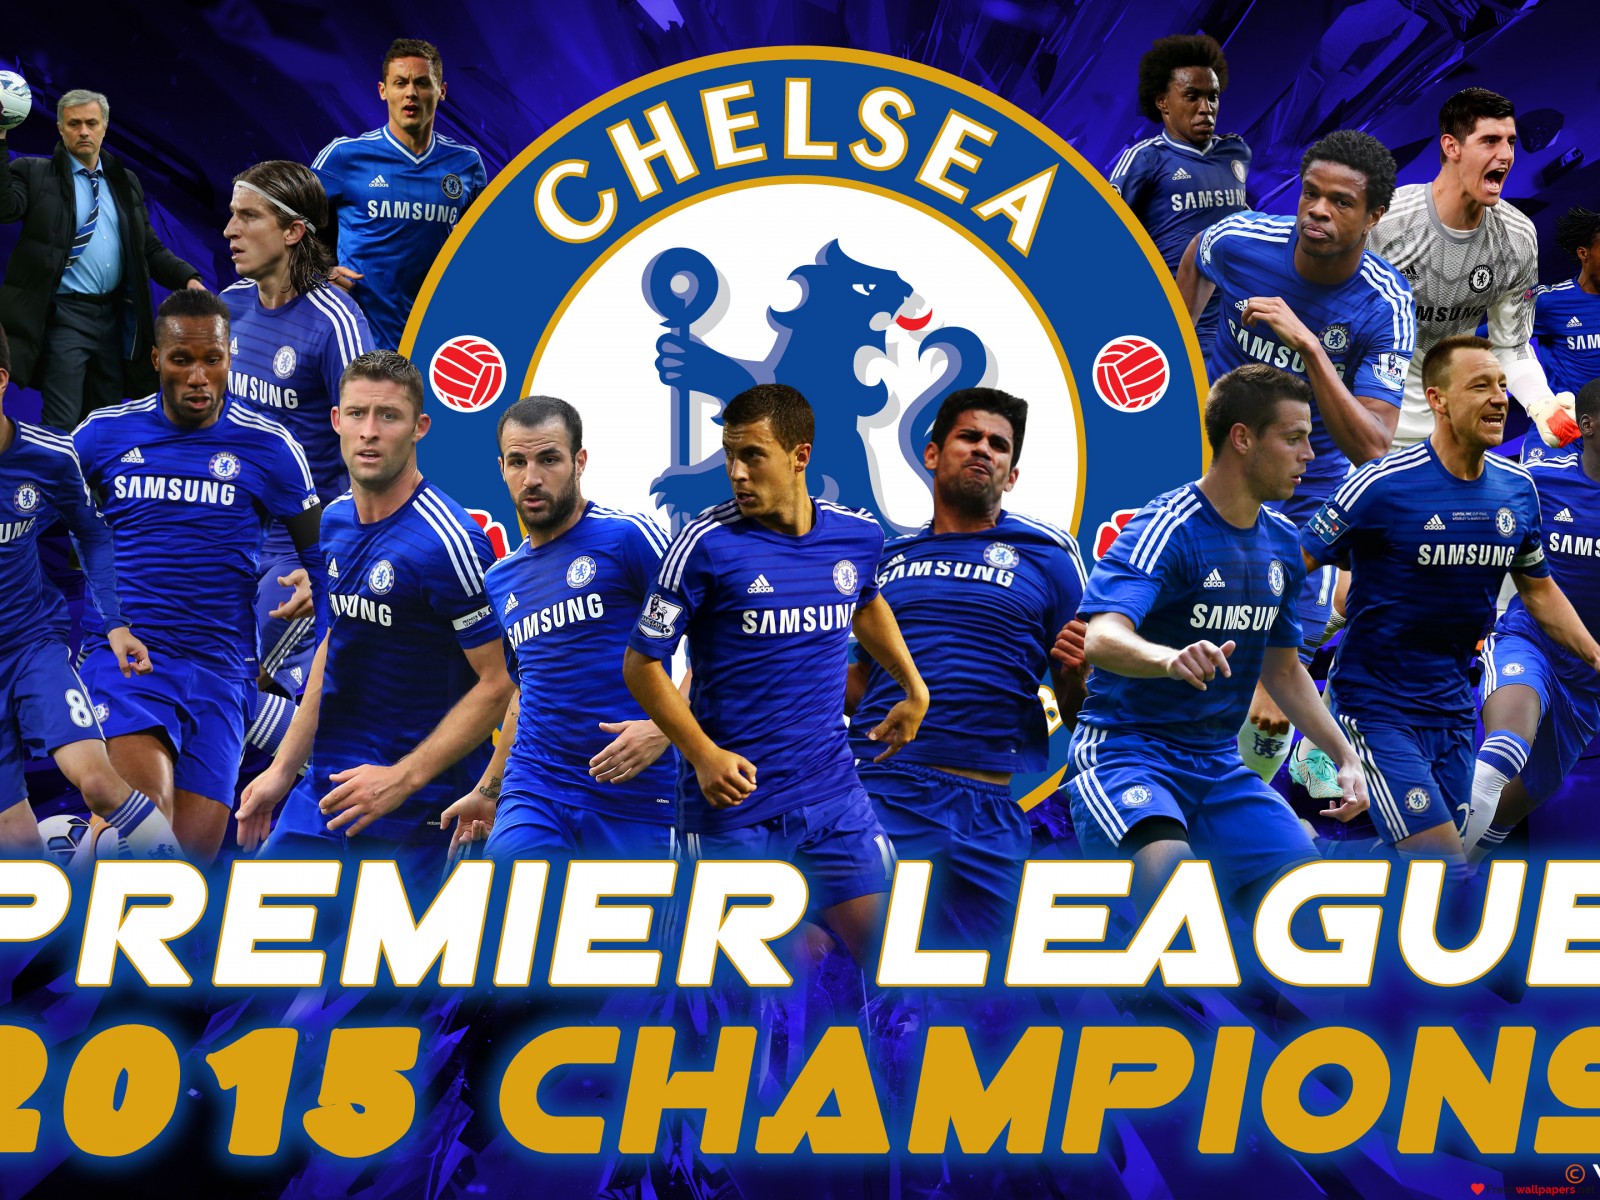 Chelsea Fc Wallpaper Top Collections Of Pictures Image